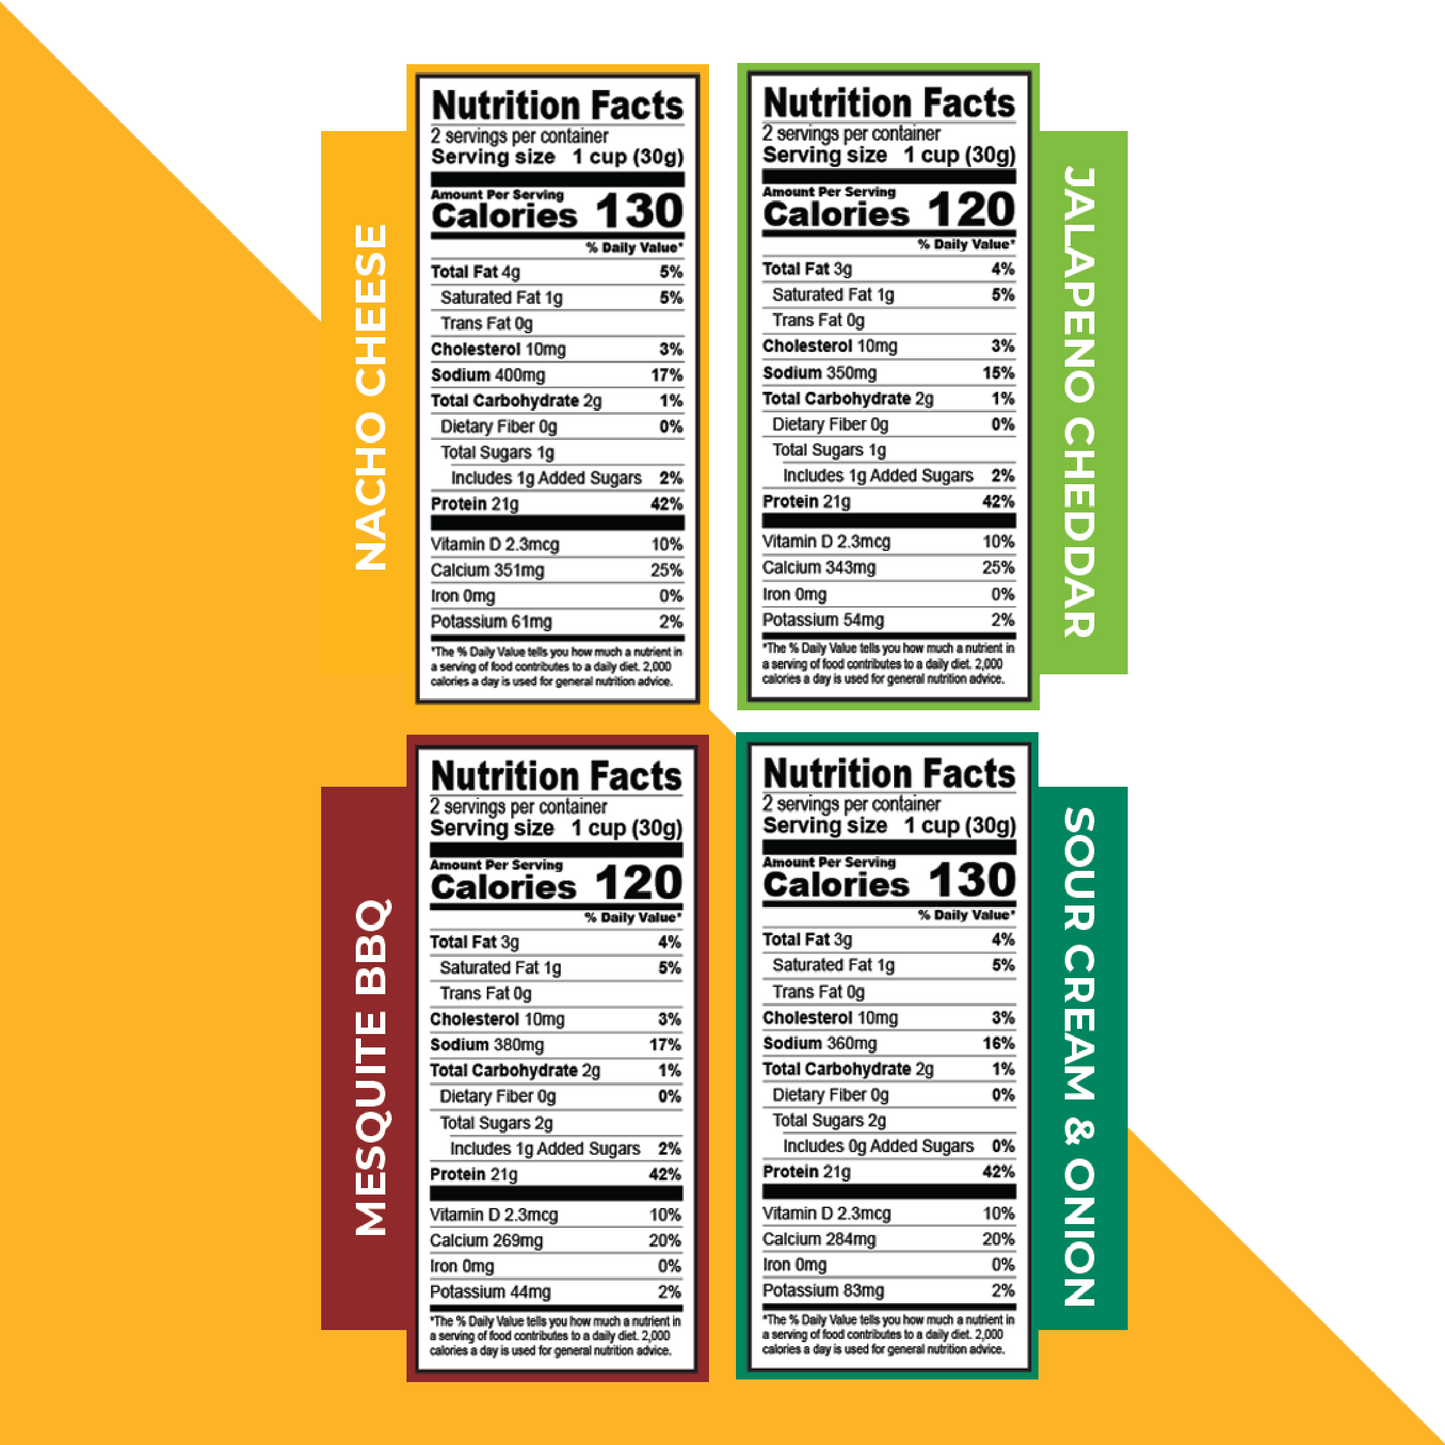 Nutrition Facts for Nacho Cheese, Jalapeno Cheddar, Sour Cream & Onion and Mesquite BBQ Protein Puffs